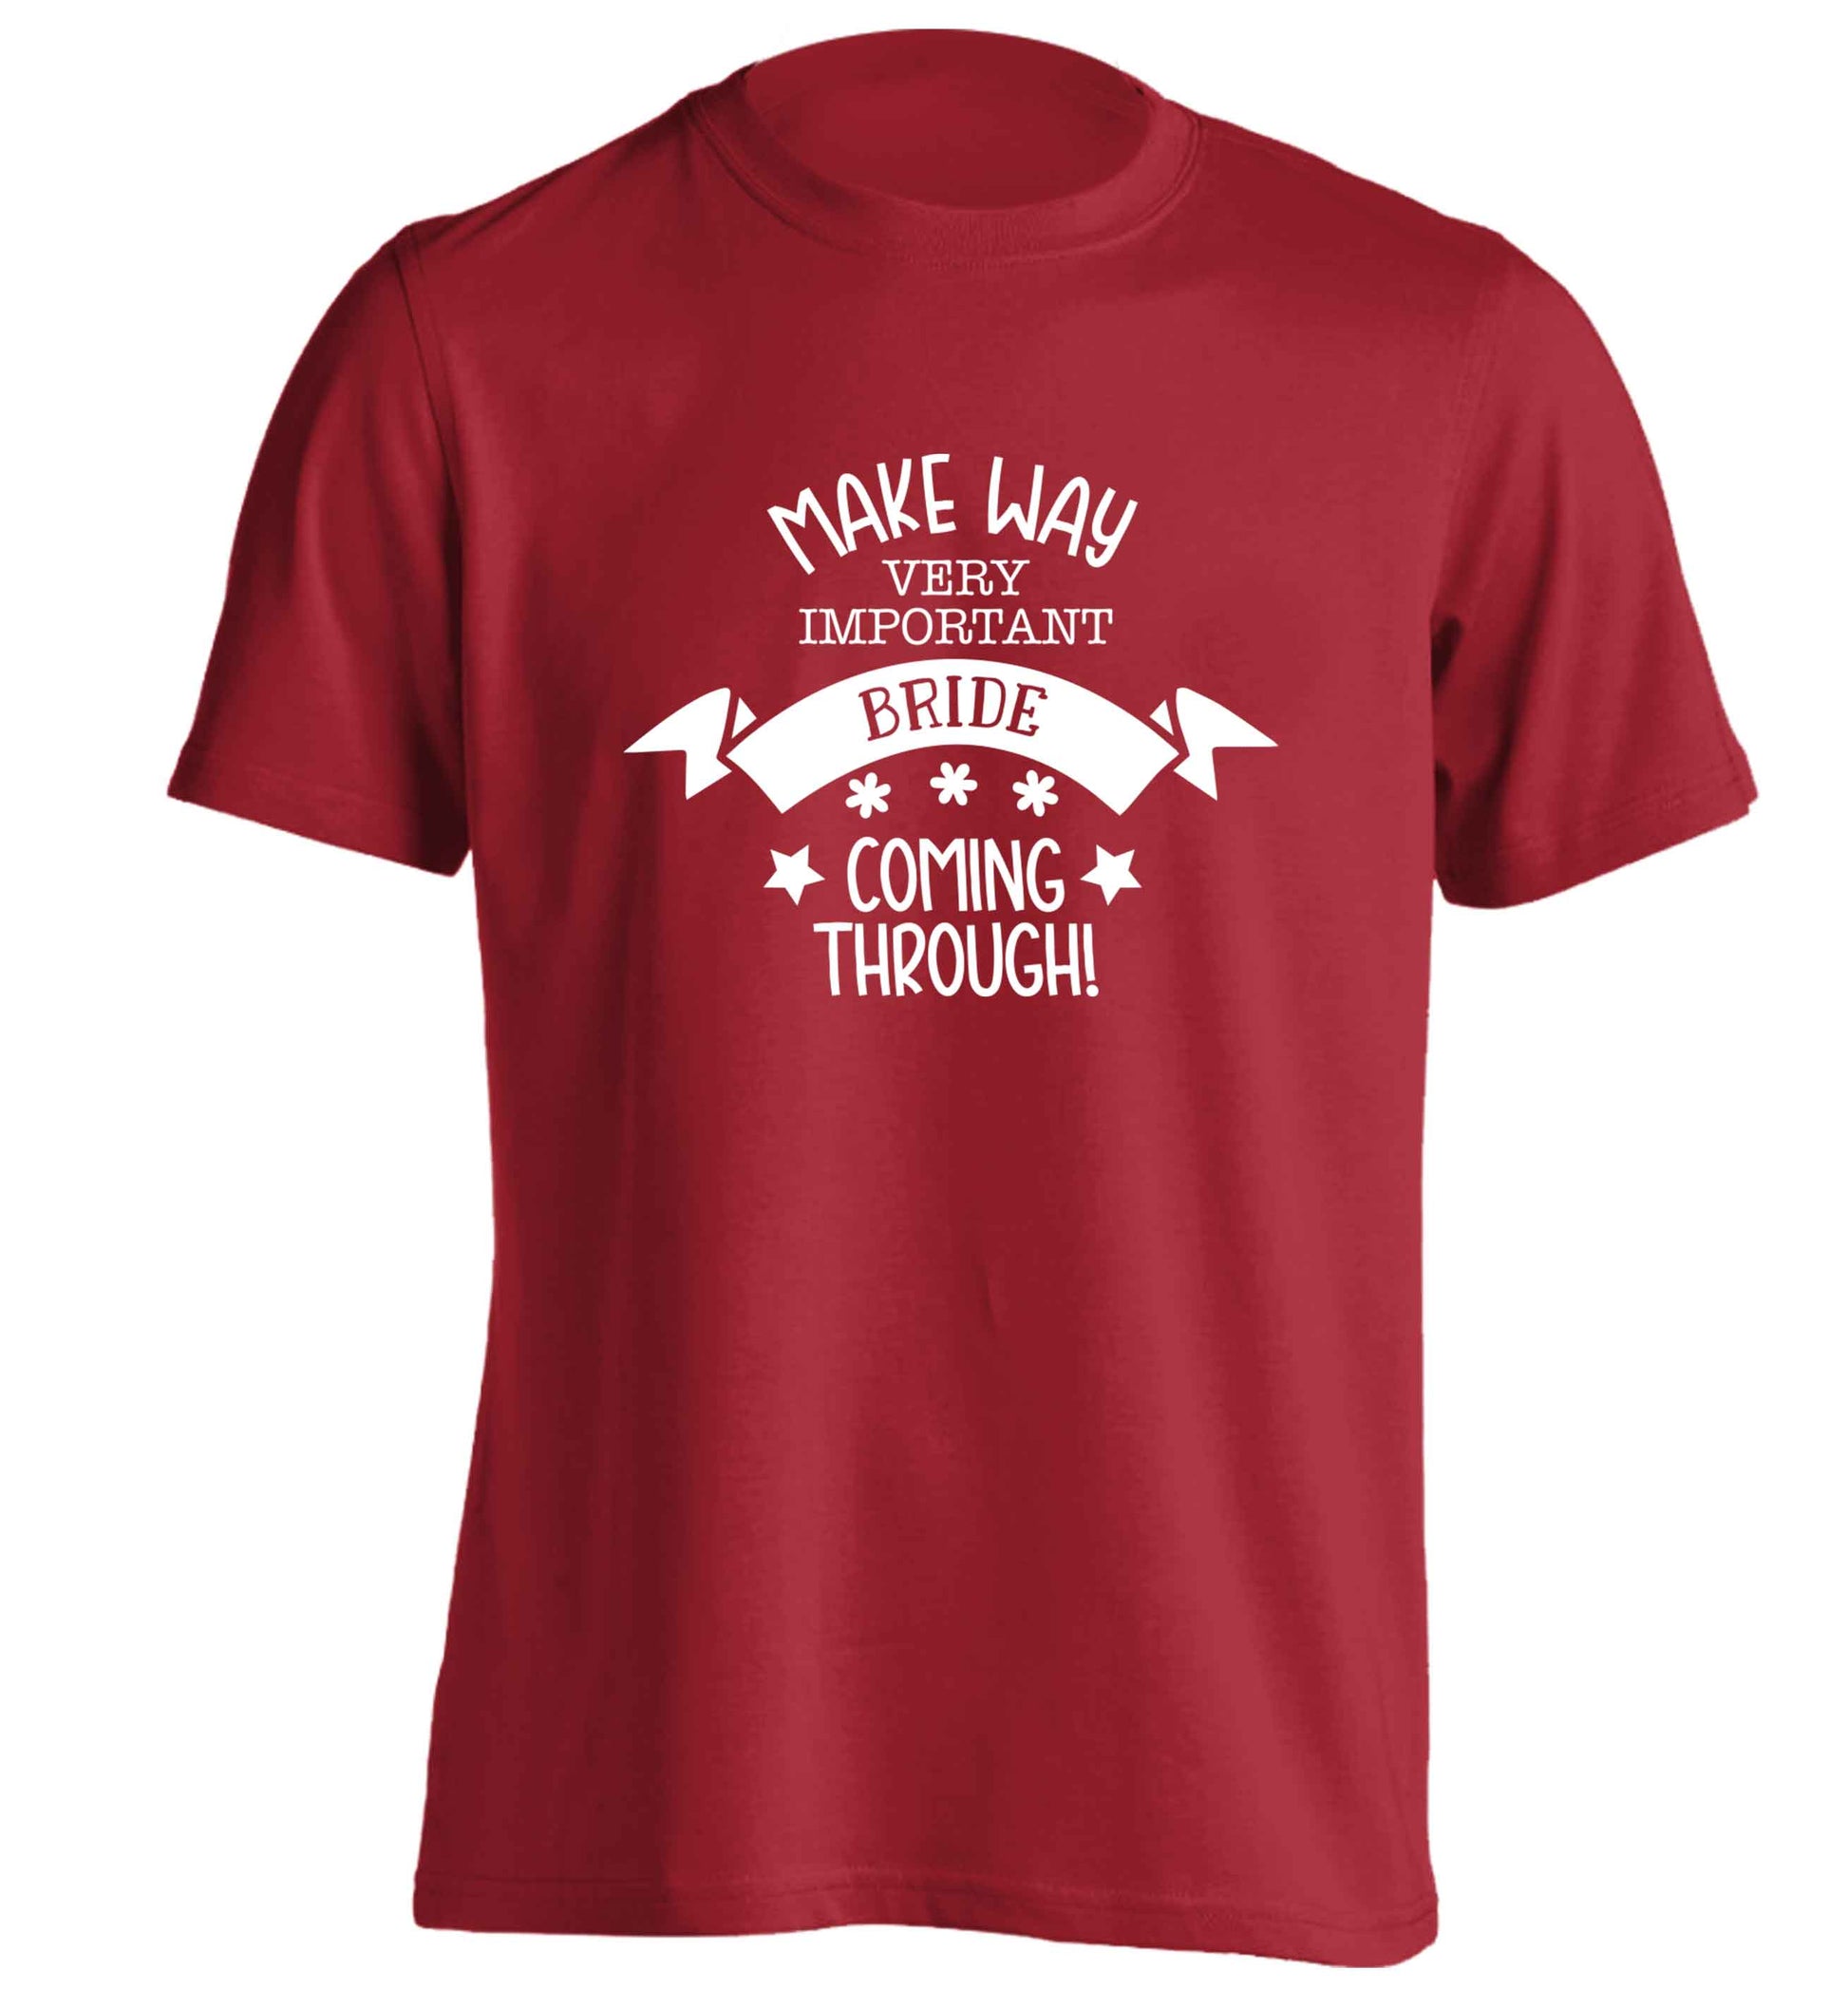 Make way V.I.P very important bride coming through! adults unisex red Tshirt 2XL